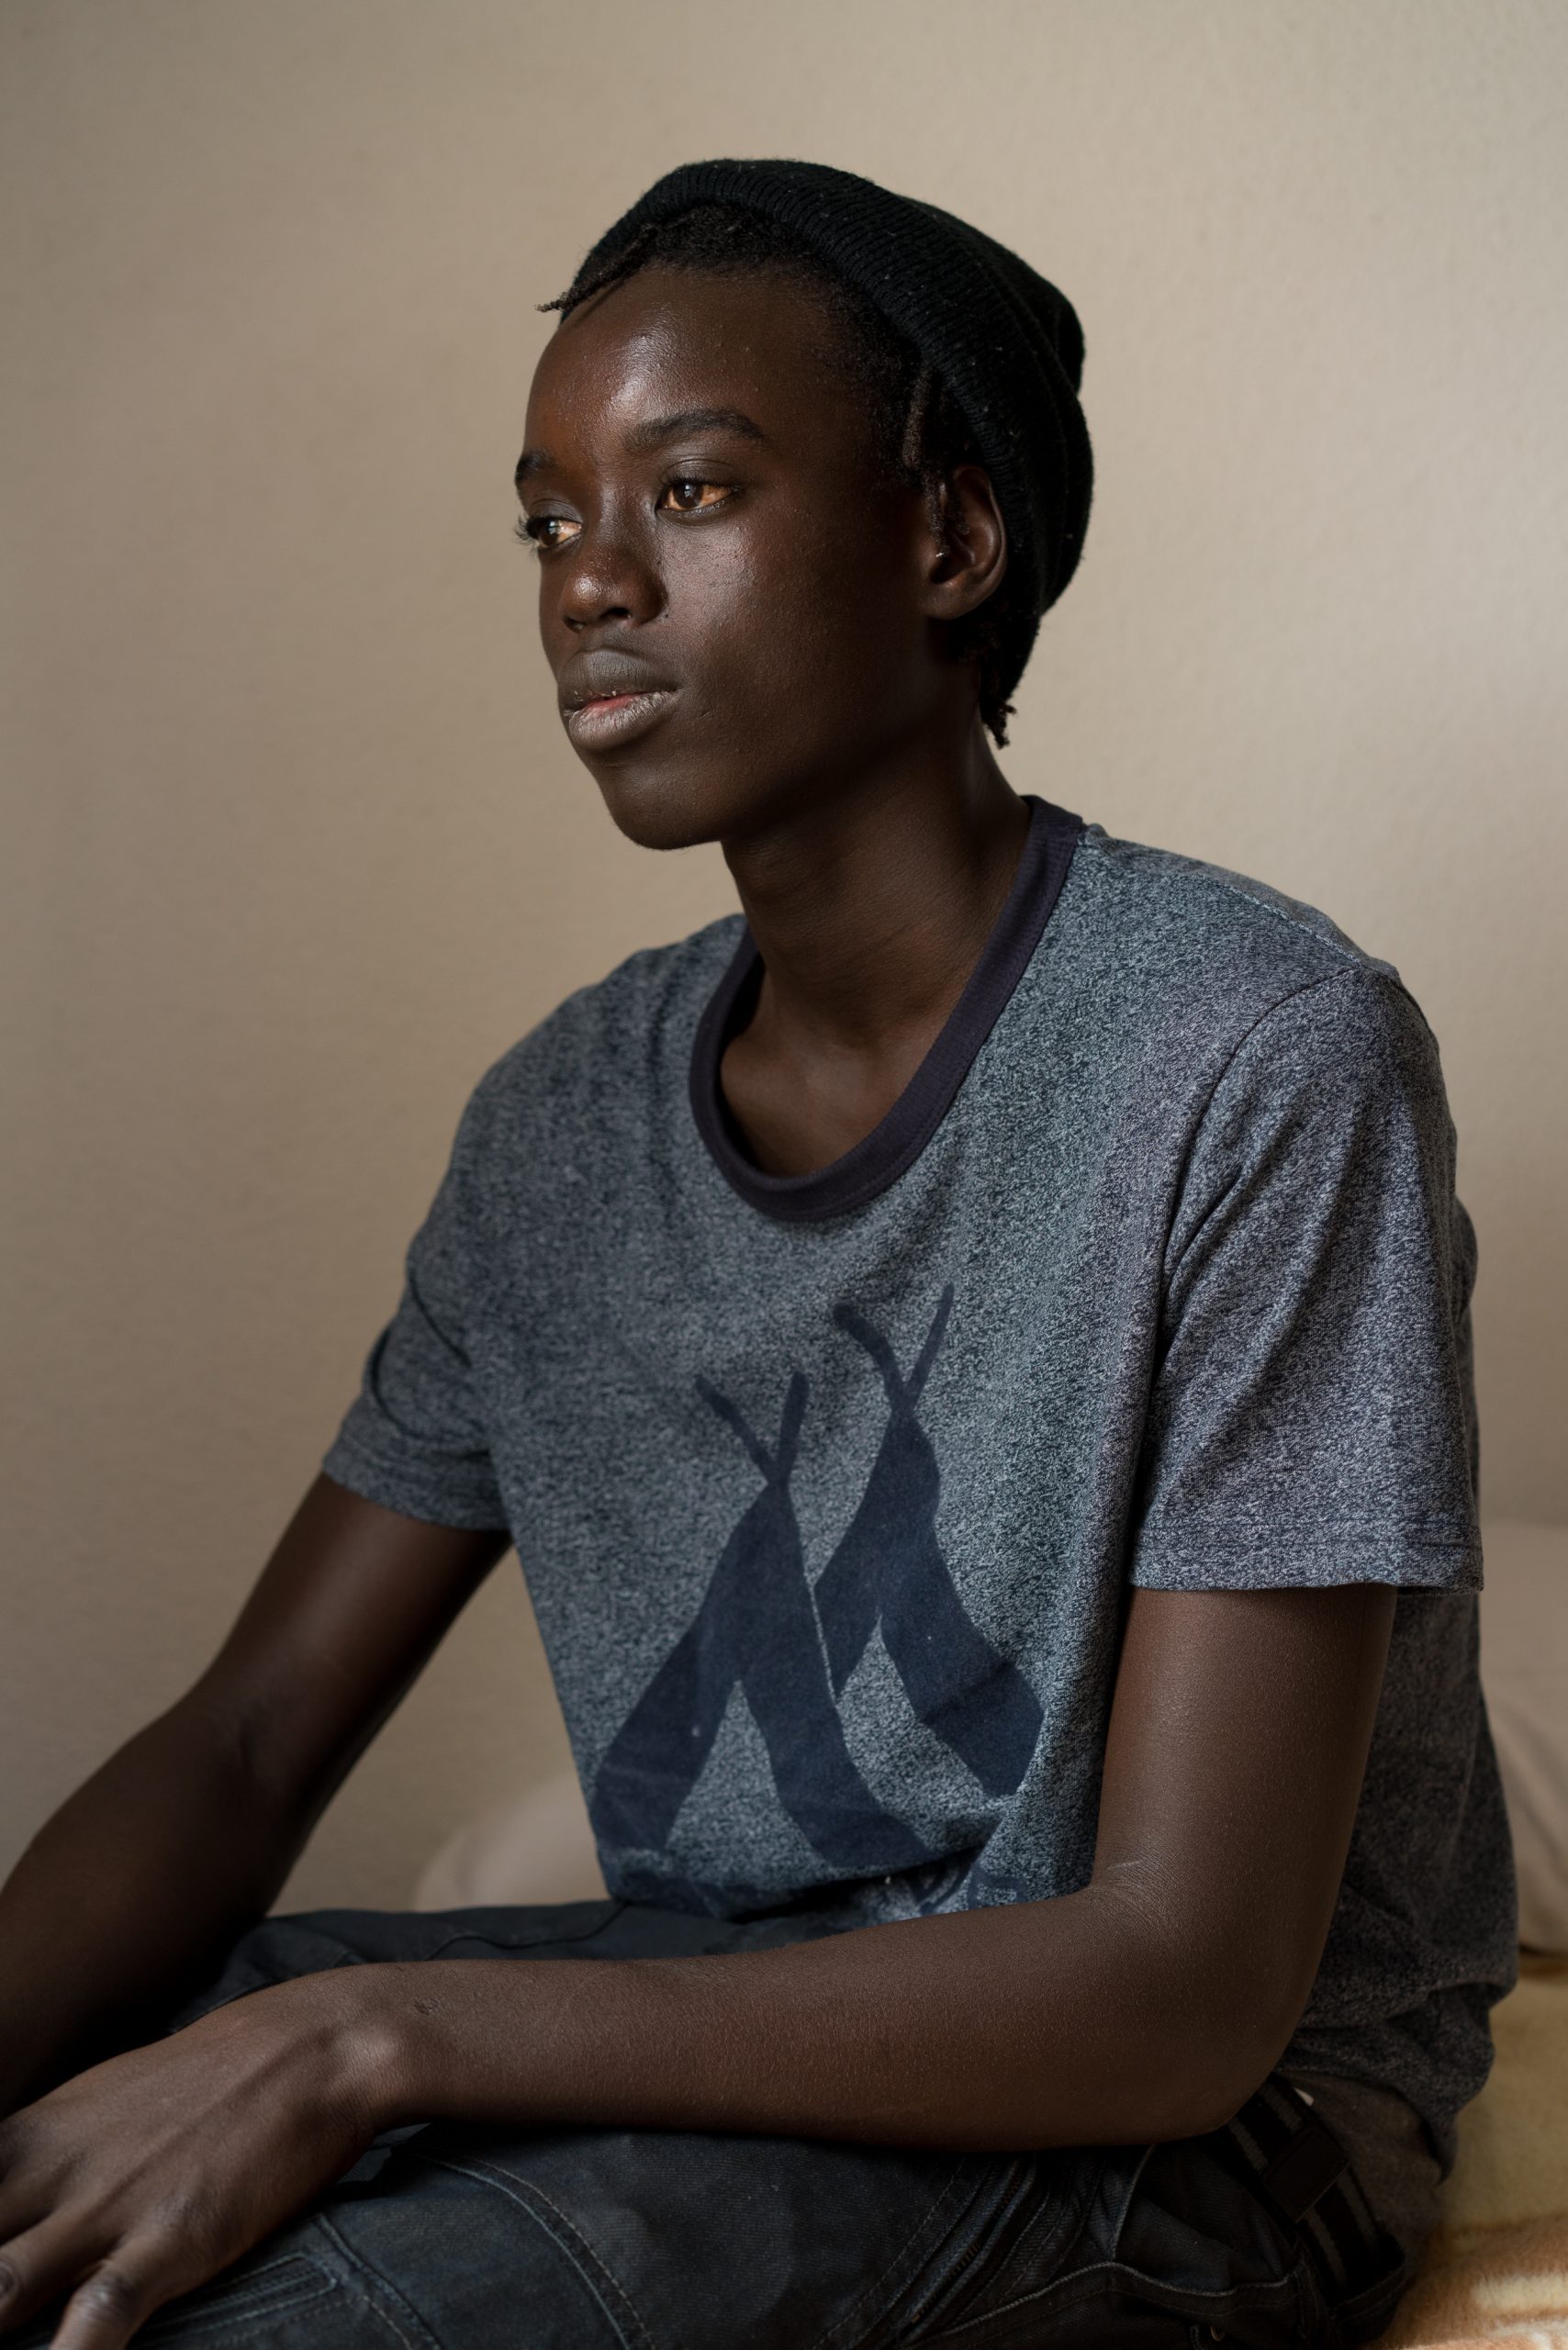 African refugee in Spain